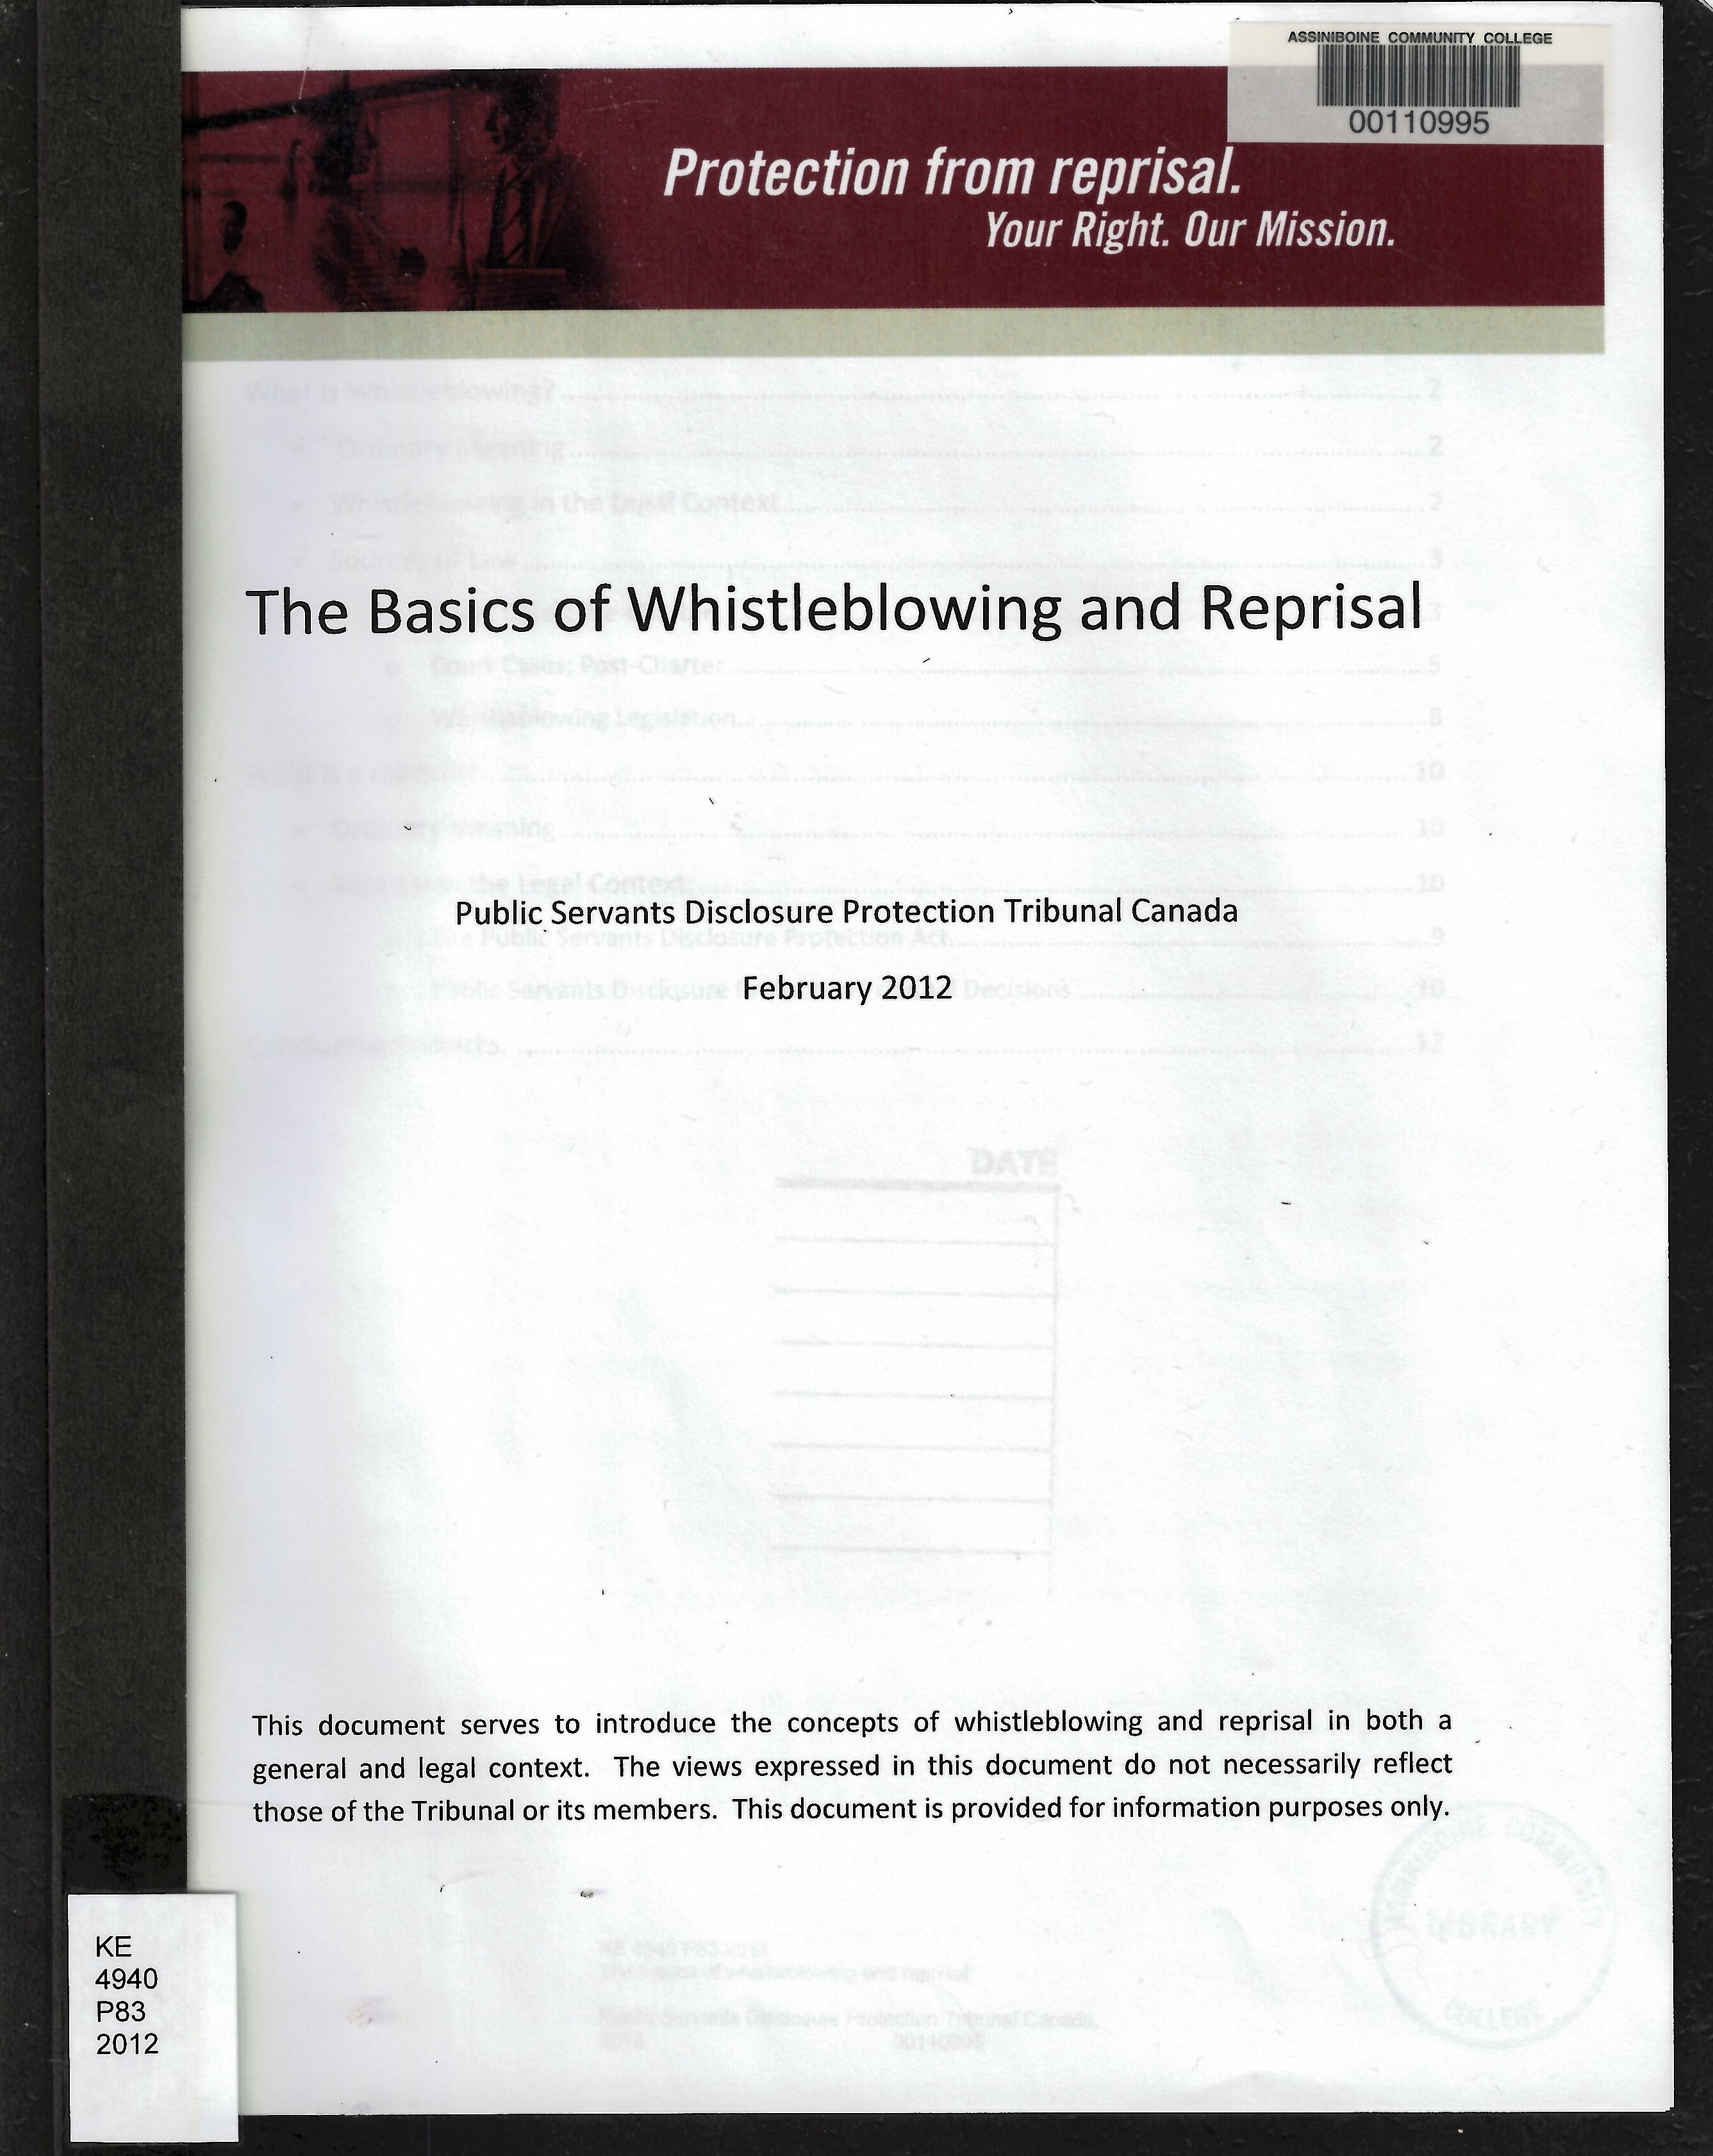 The basics of whistleblowing and reprisal